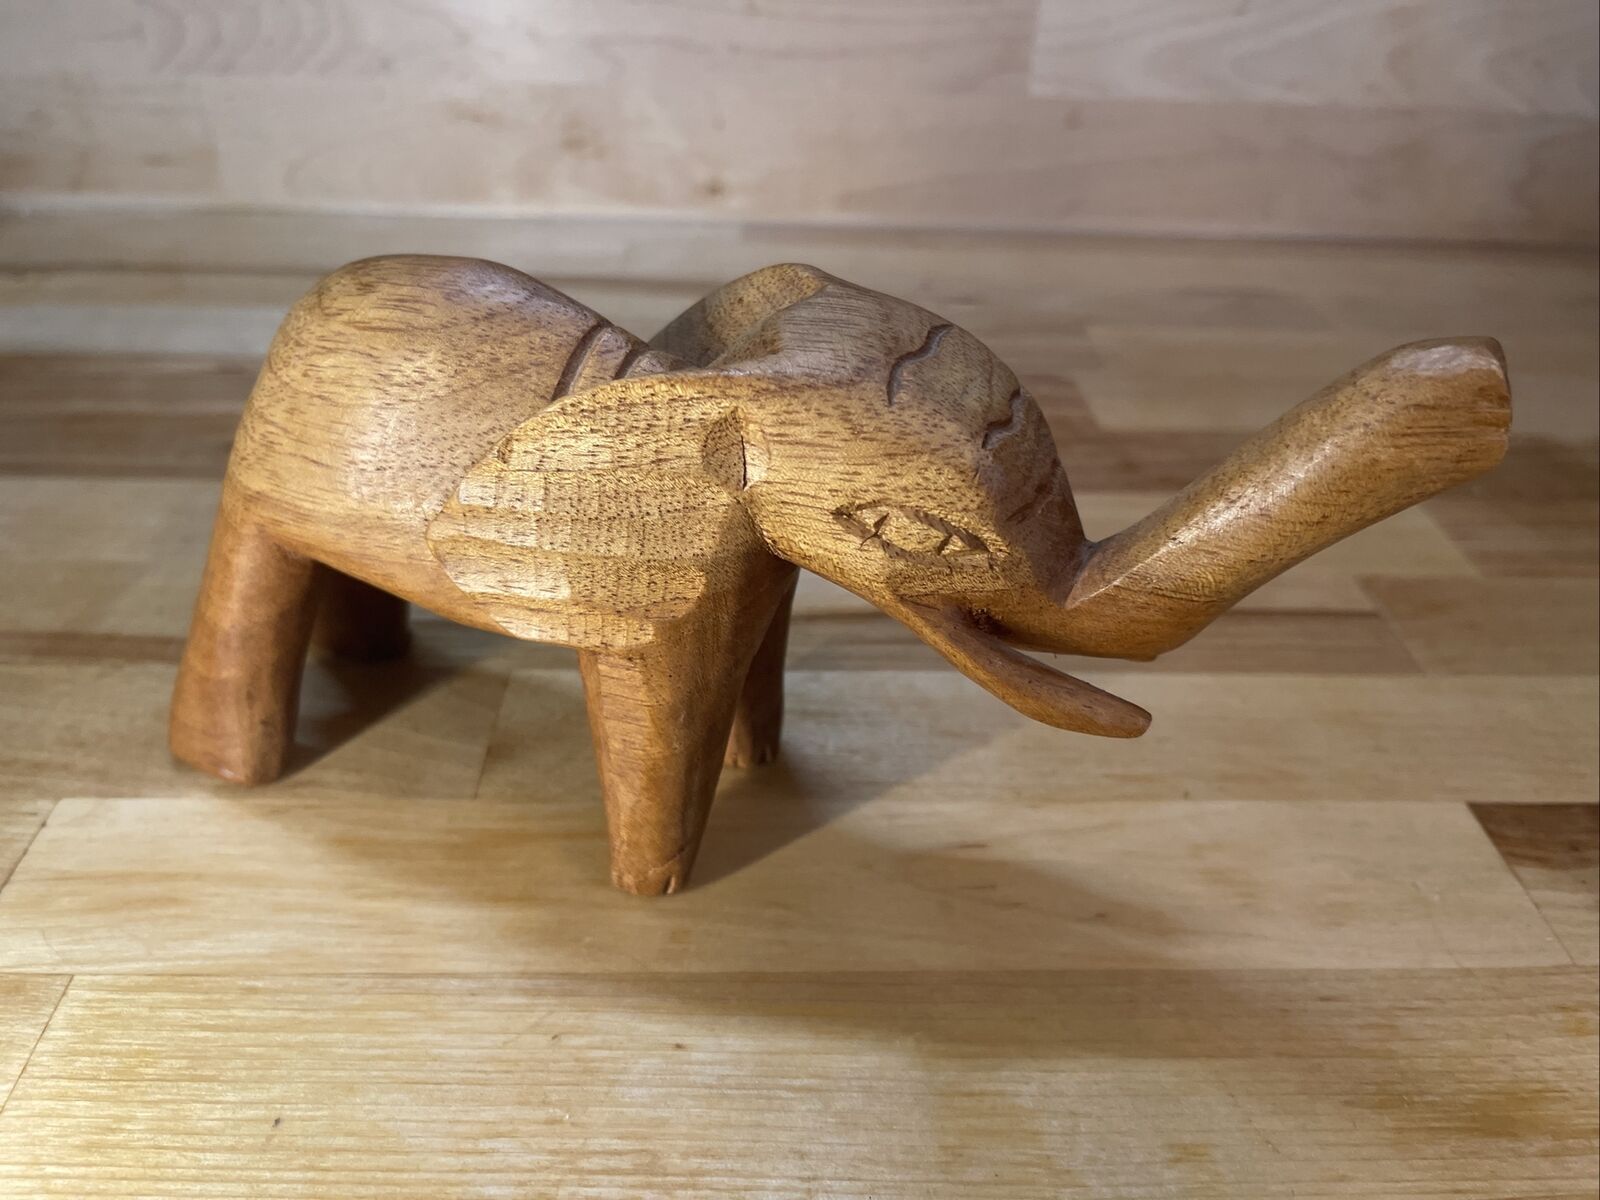 Vintage Hand Carved Figurine Wooden Elephant Primitive with Tusks 8”x4”x2.5”